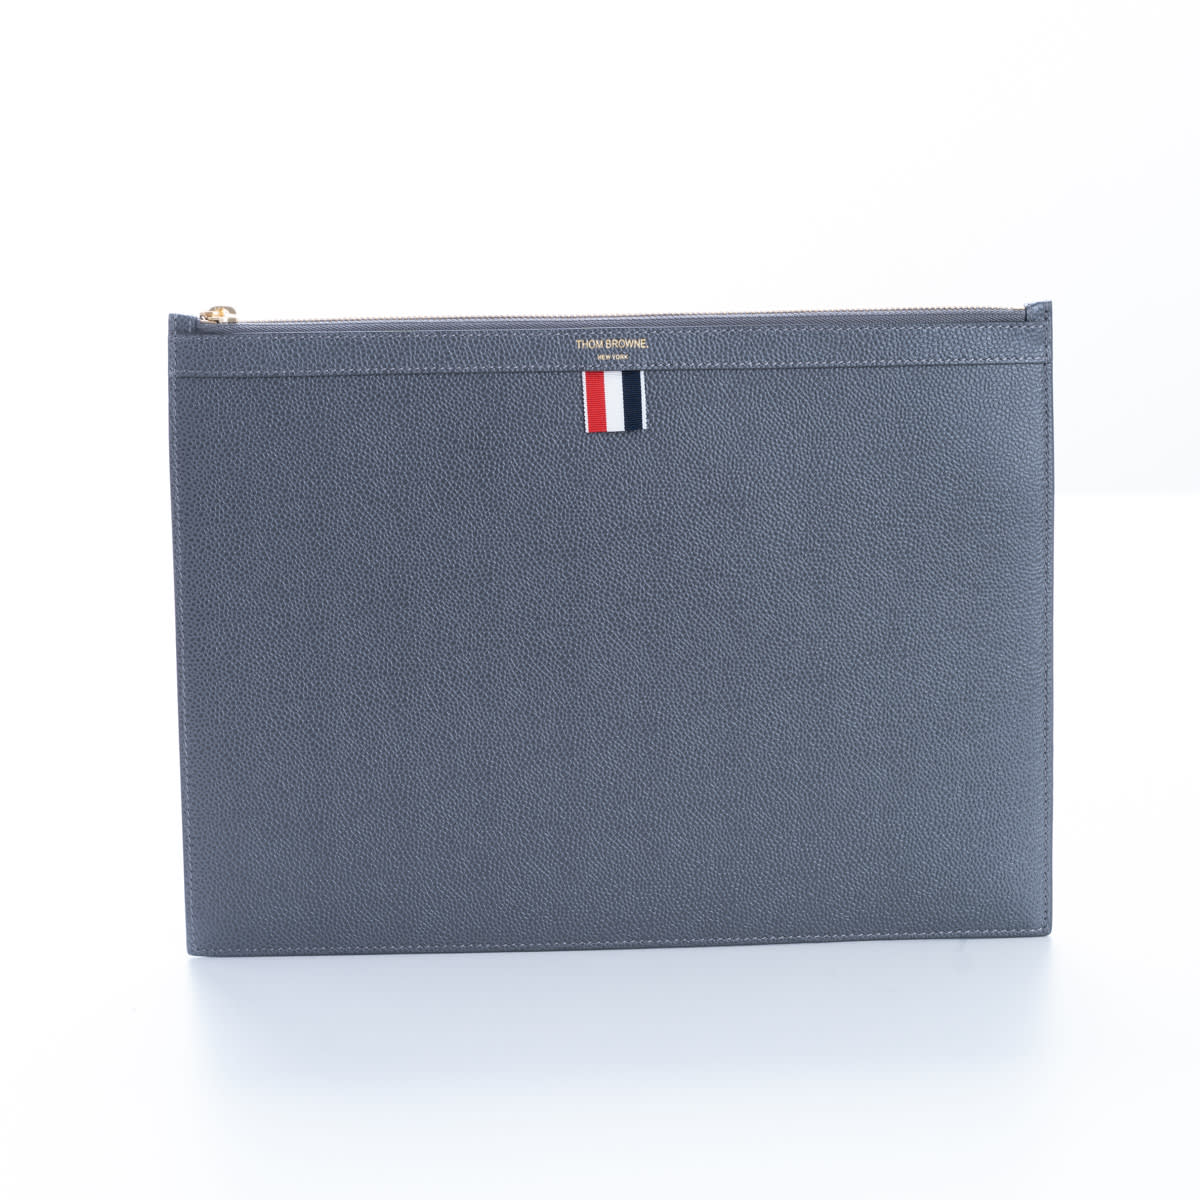 Thom Browne Leather Pouch